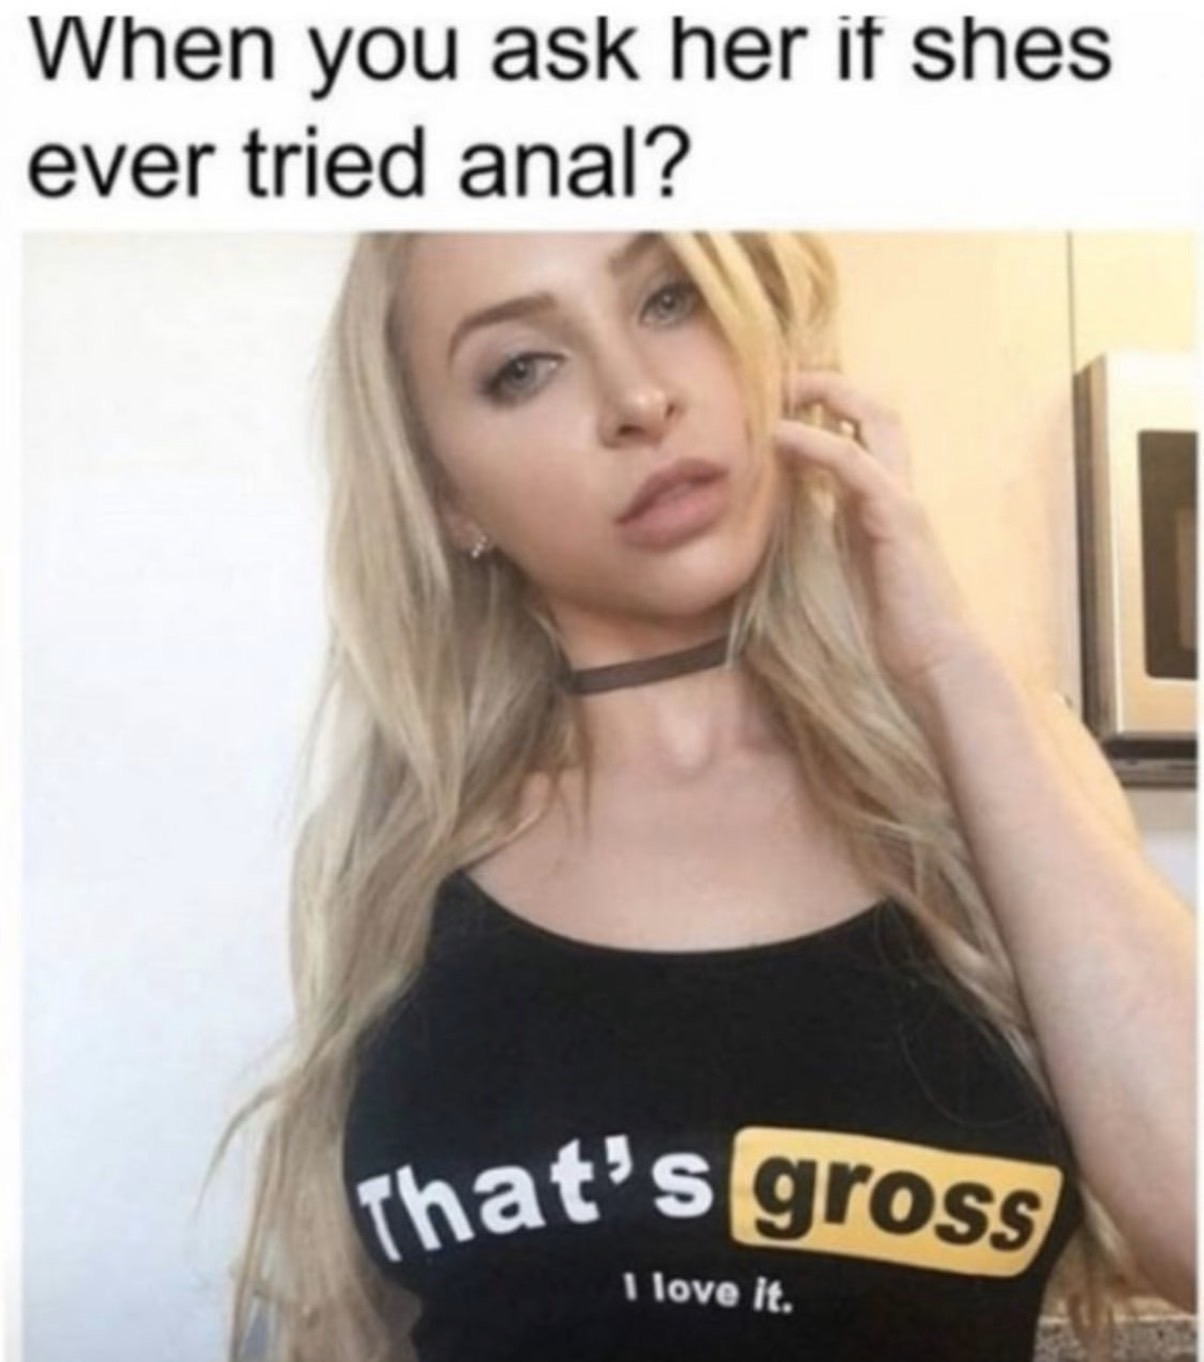 humpday meme - funny sex memes - When you ask her if shes ever tried anal? That's gross I love it.